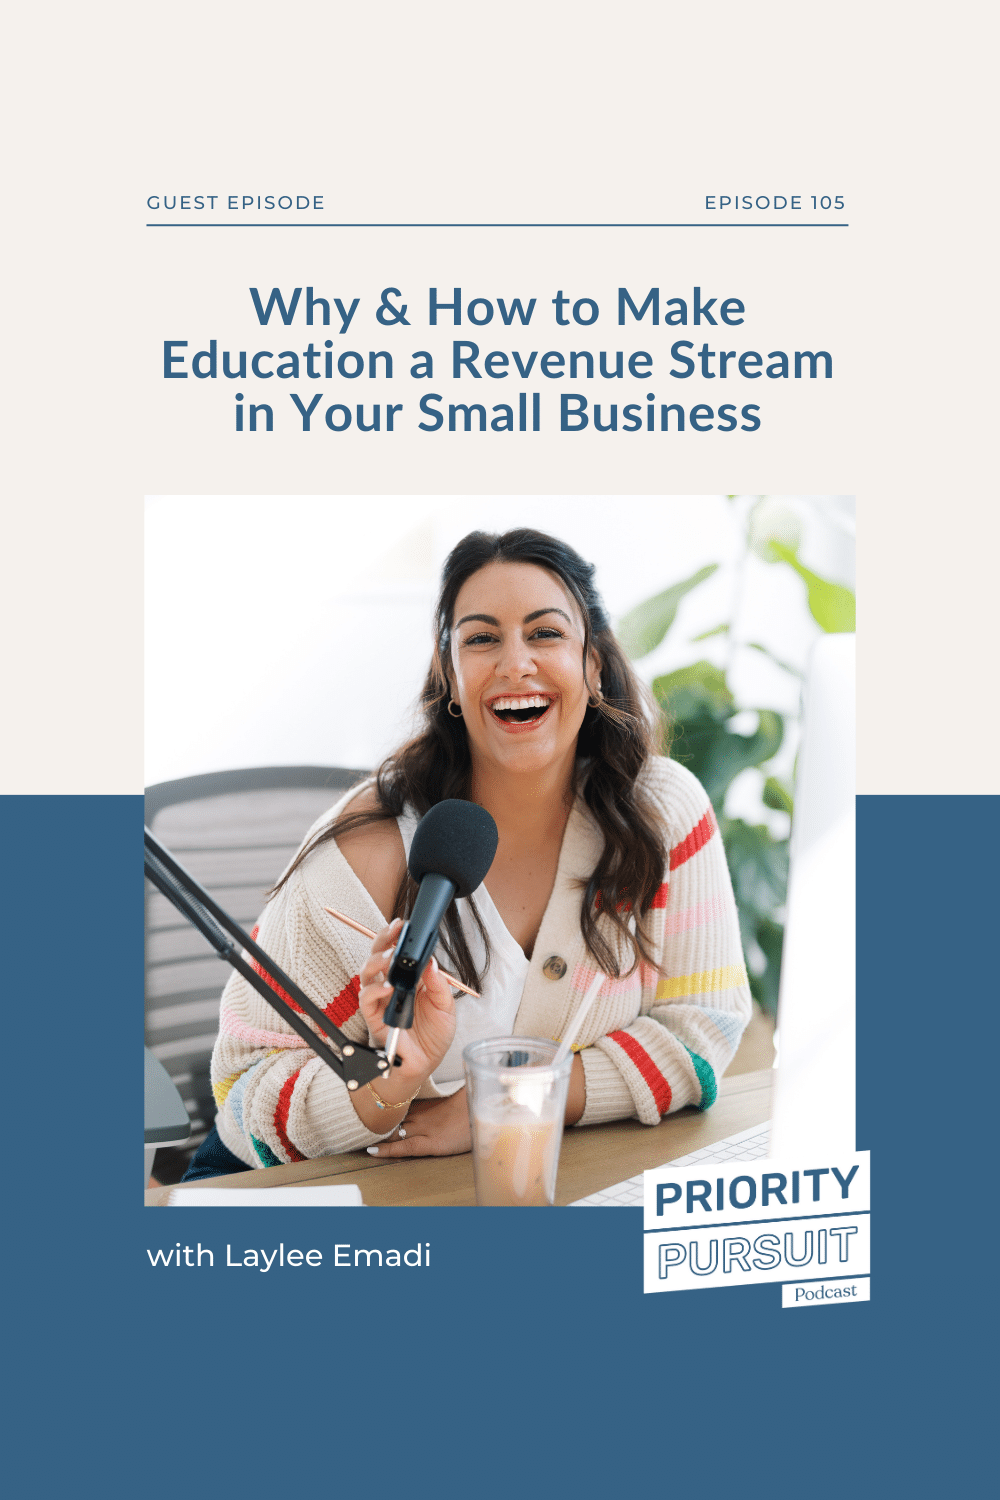 Learn how to make education a revenue stream in your small business as we talk with the queen of education, Laylee Emadi, in this episode of Priority Pursuit!